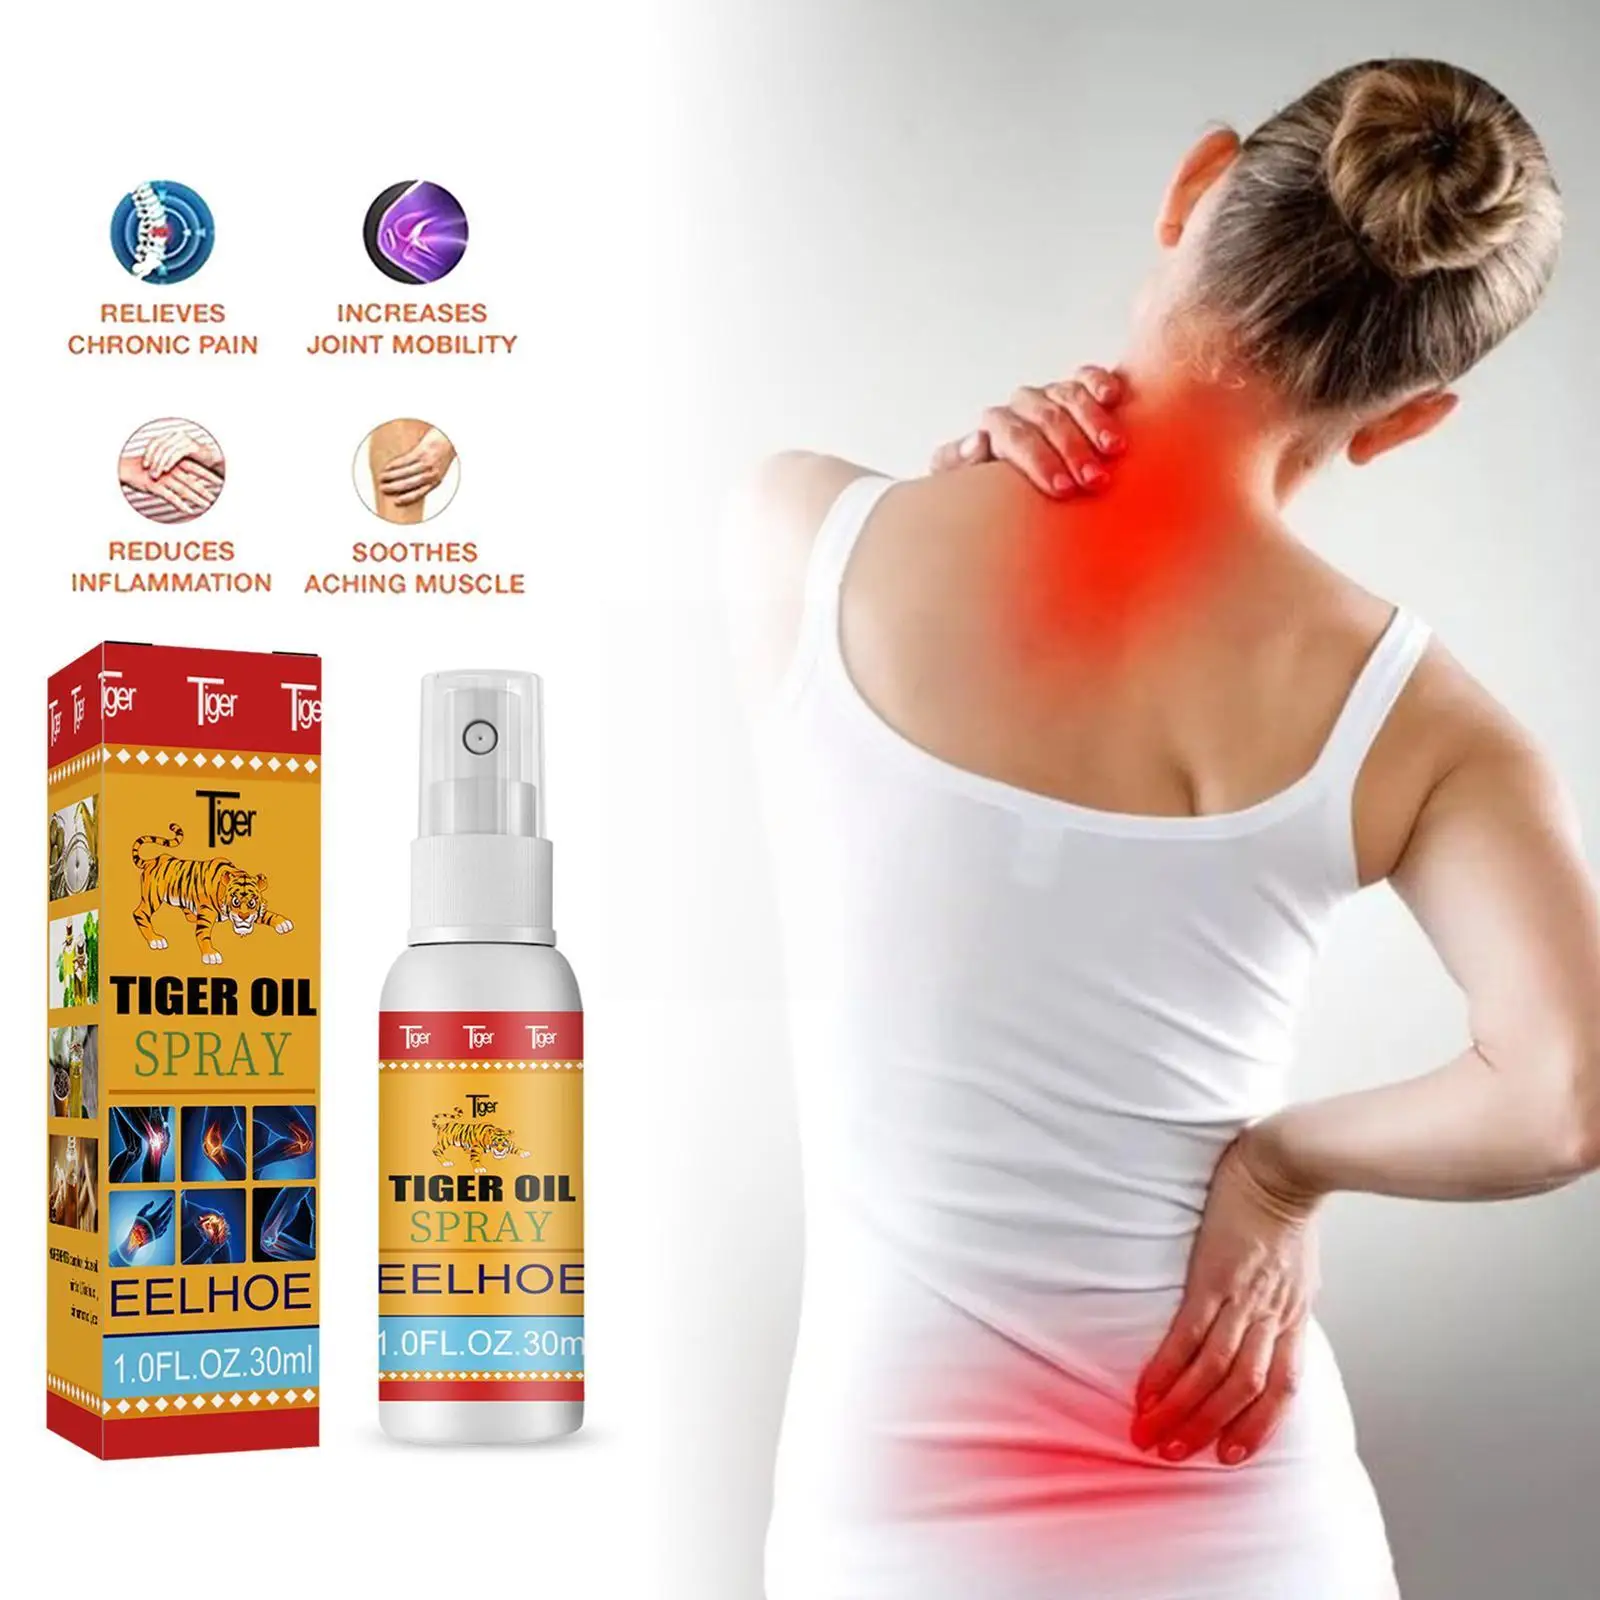 

Spray Quick Muscle Pain Relief Spray Relieves Joint Pain Soreness Sprain Cervial Discomfort for Arms Legs Back Body Care Sp M5W5